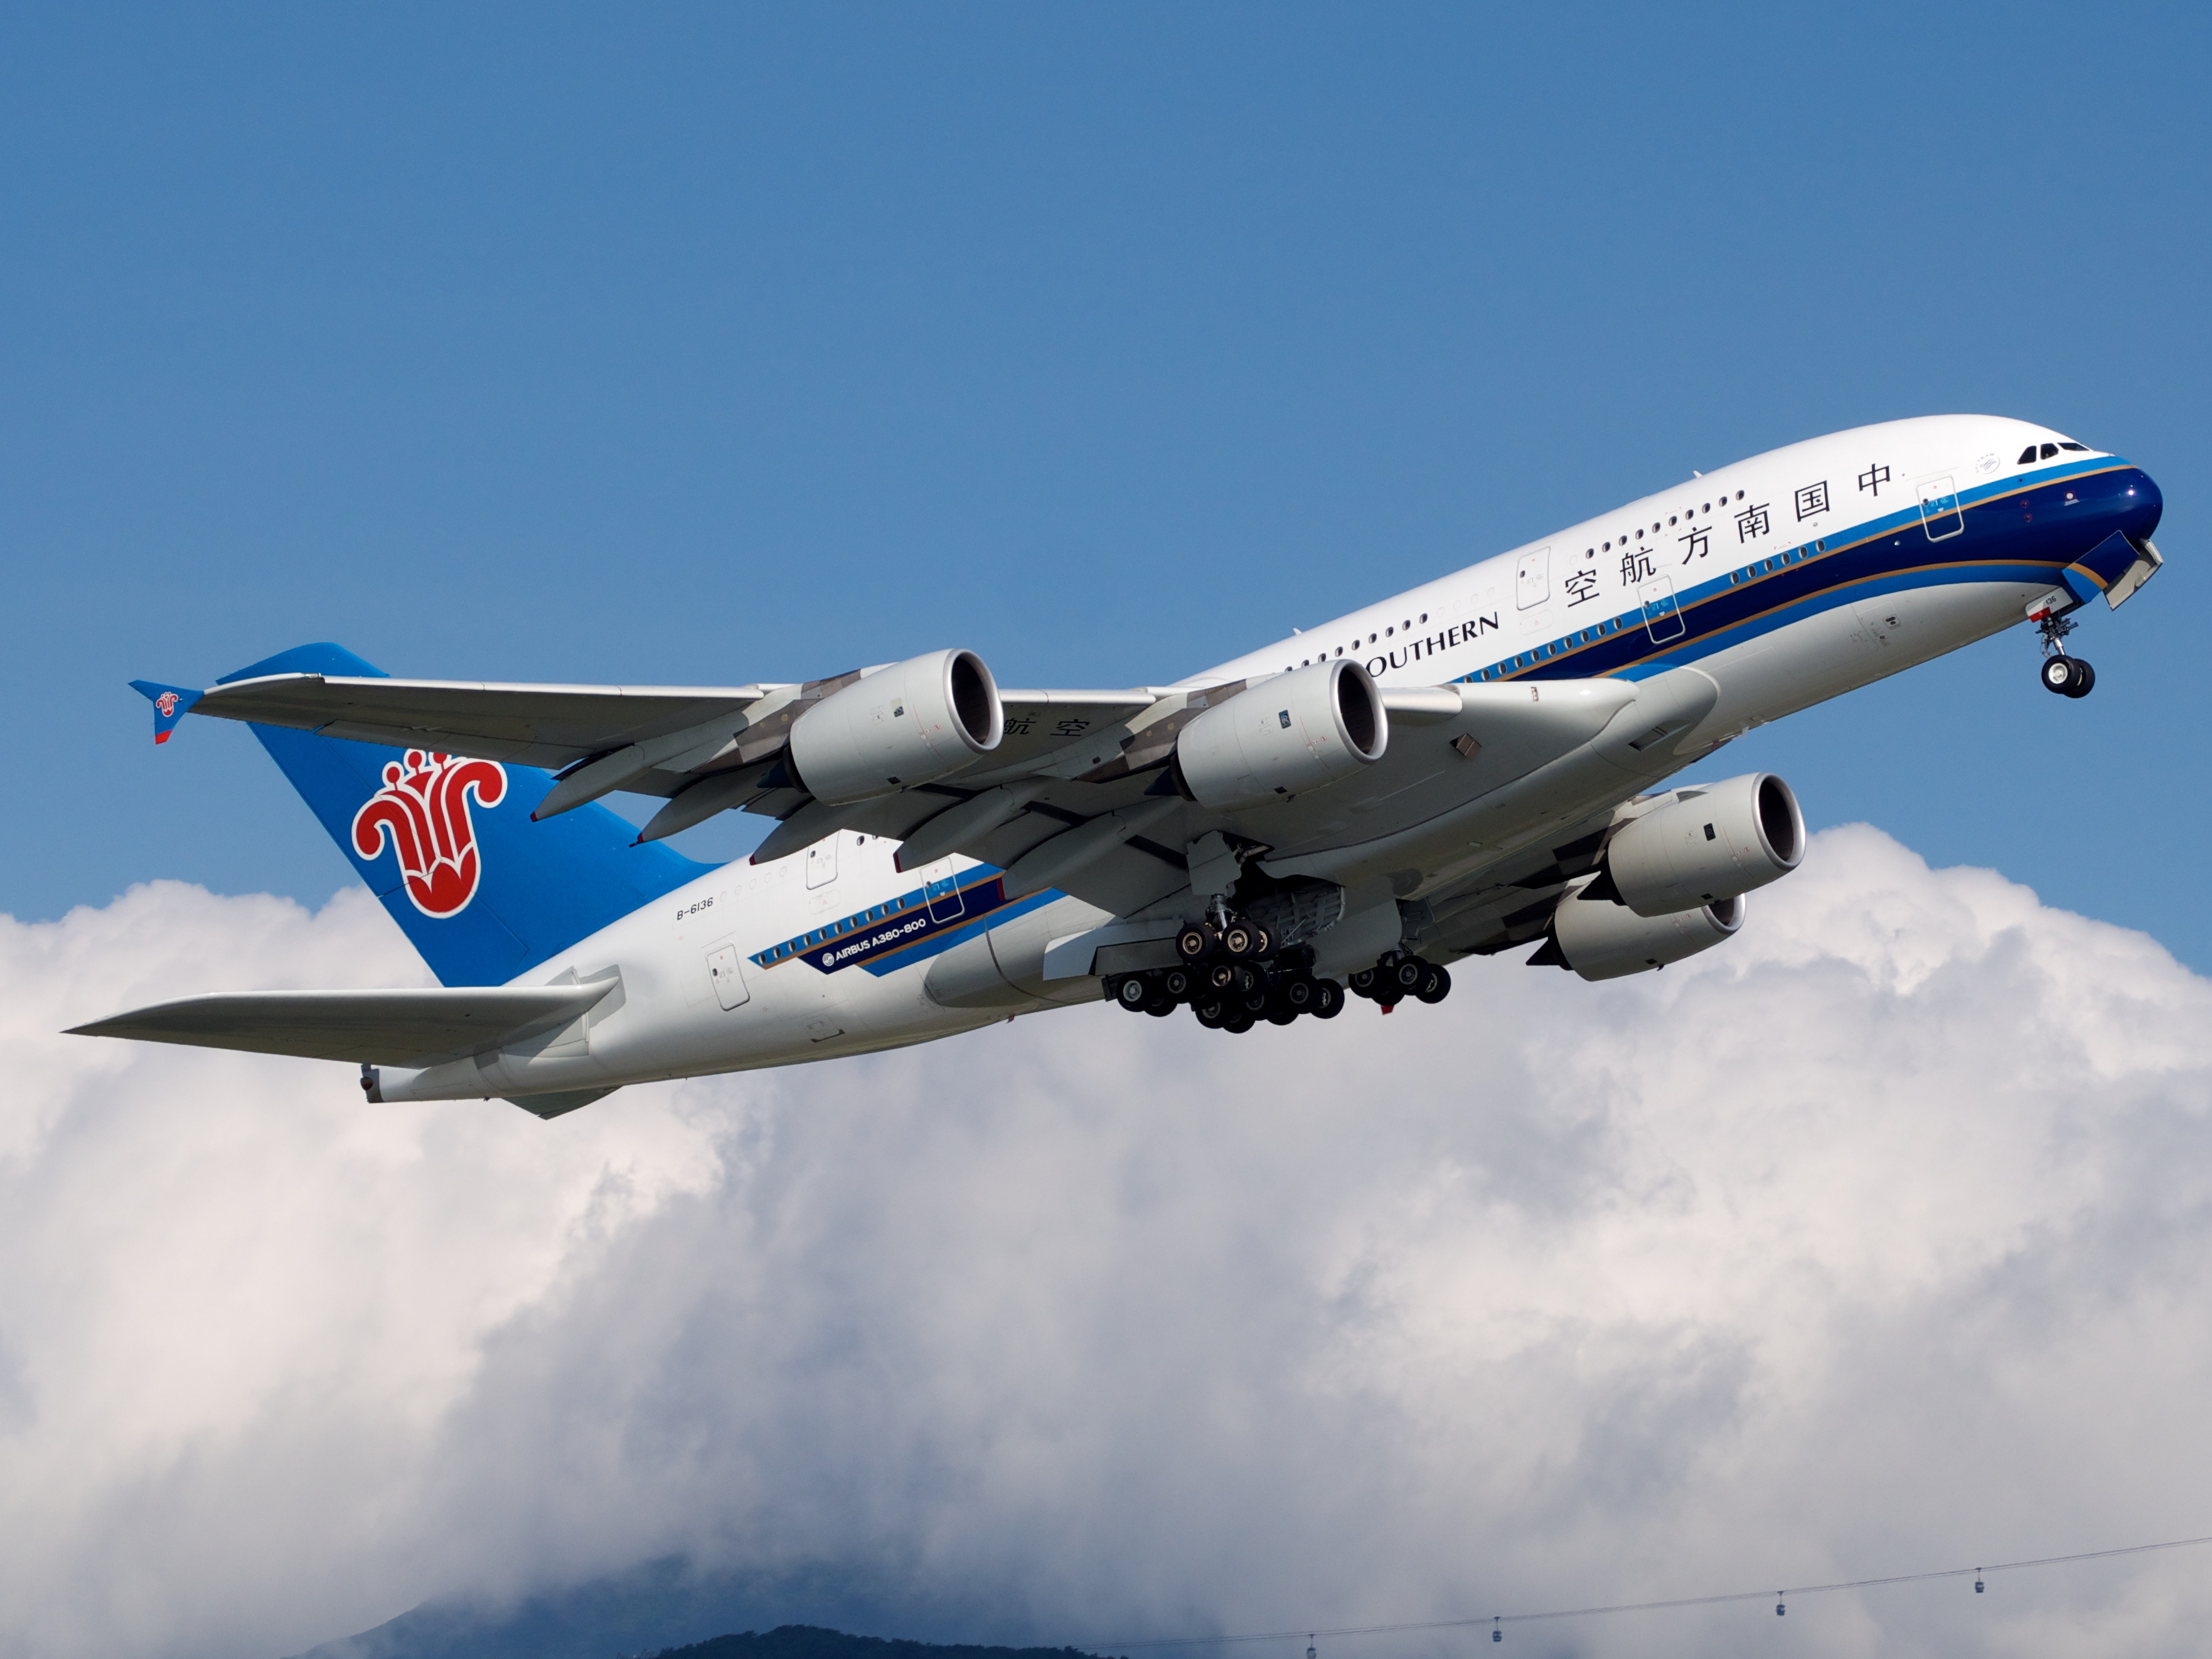 China Southern and American Airlines in lounge-sharing deal